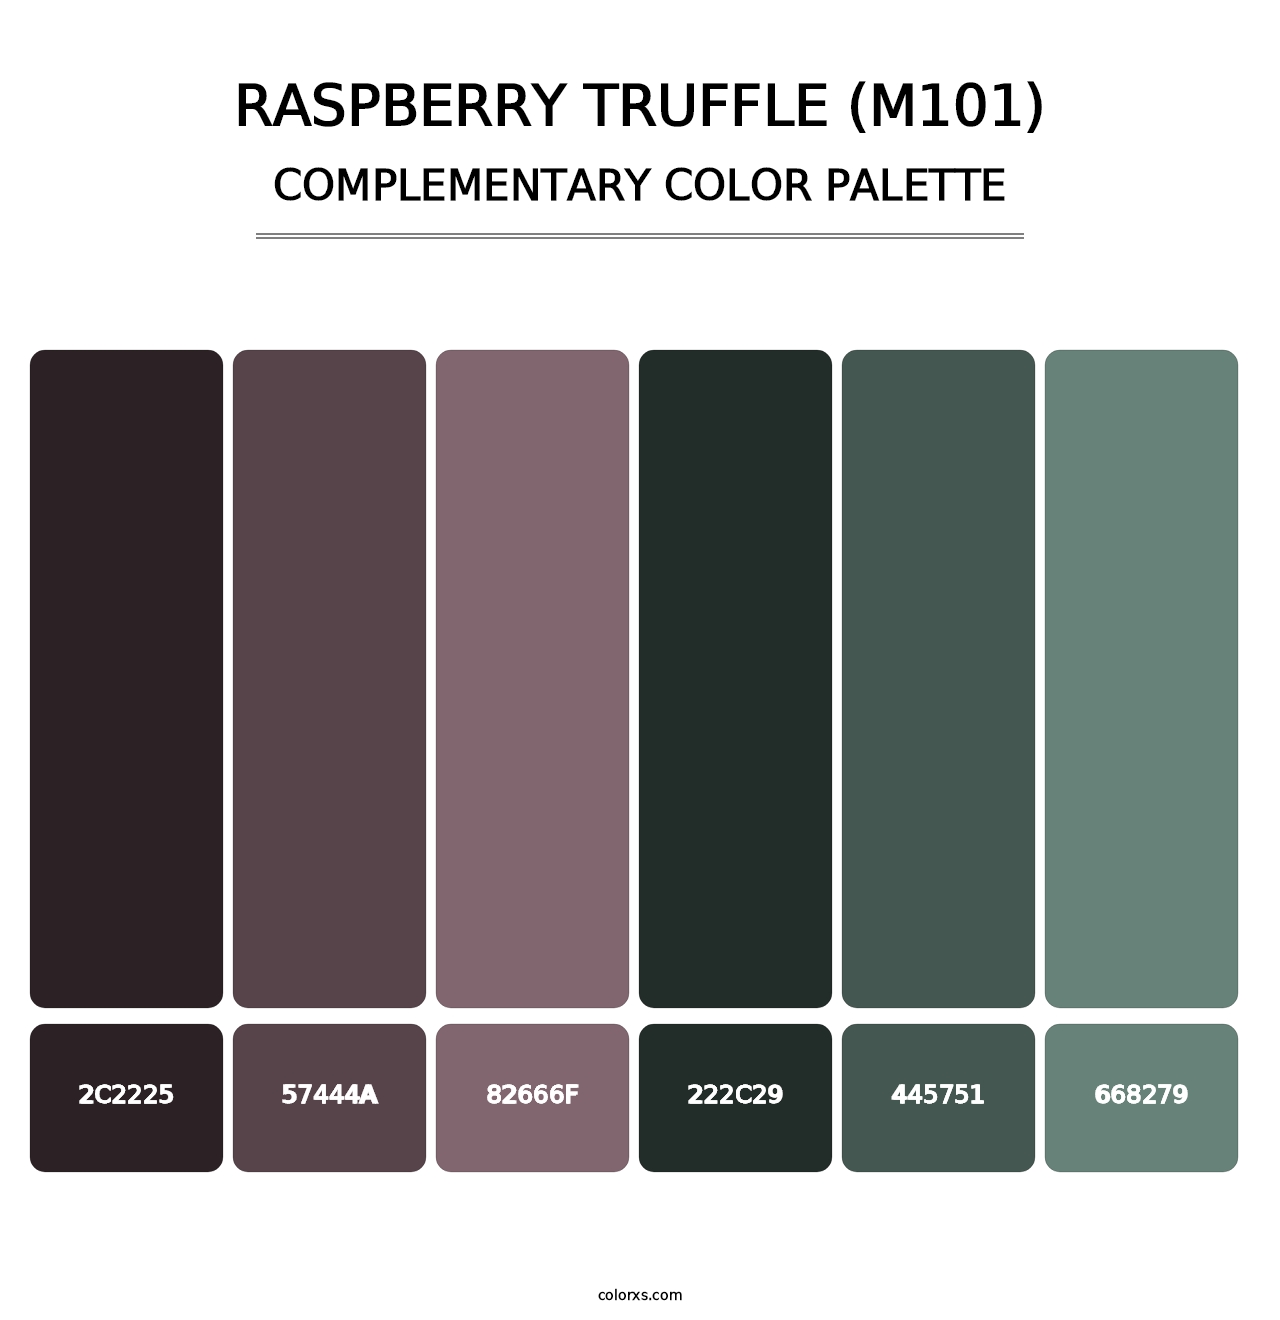 Raspberry Truffle (M101) - Complementary Color Palette